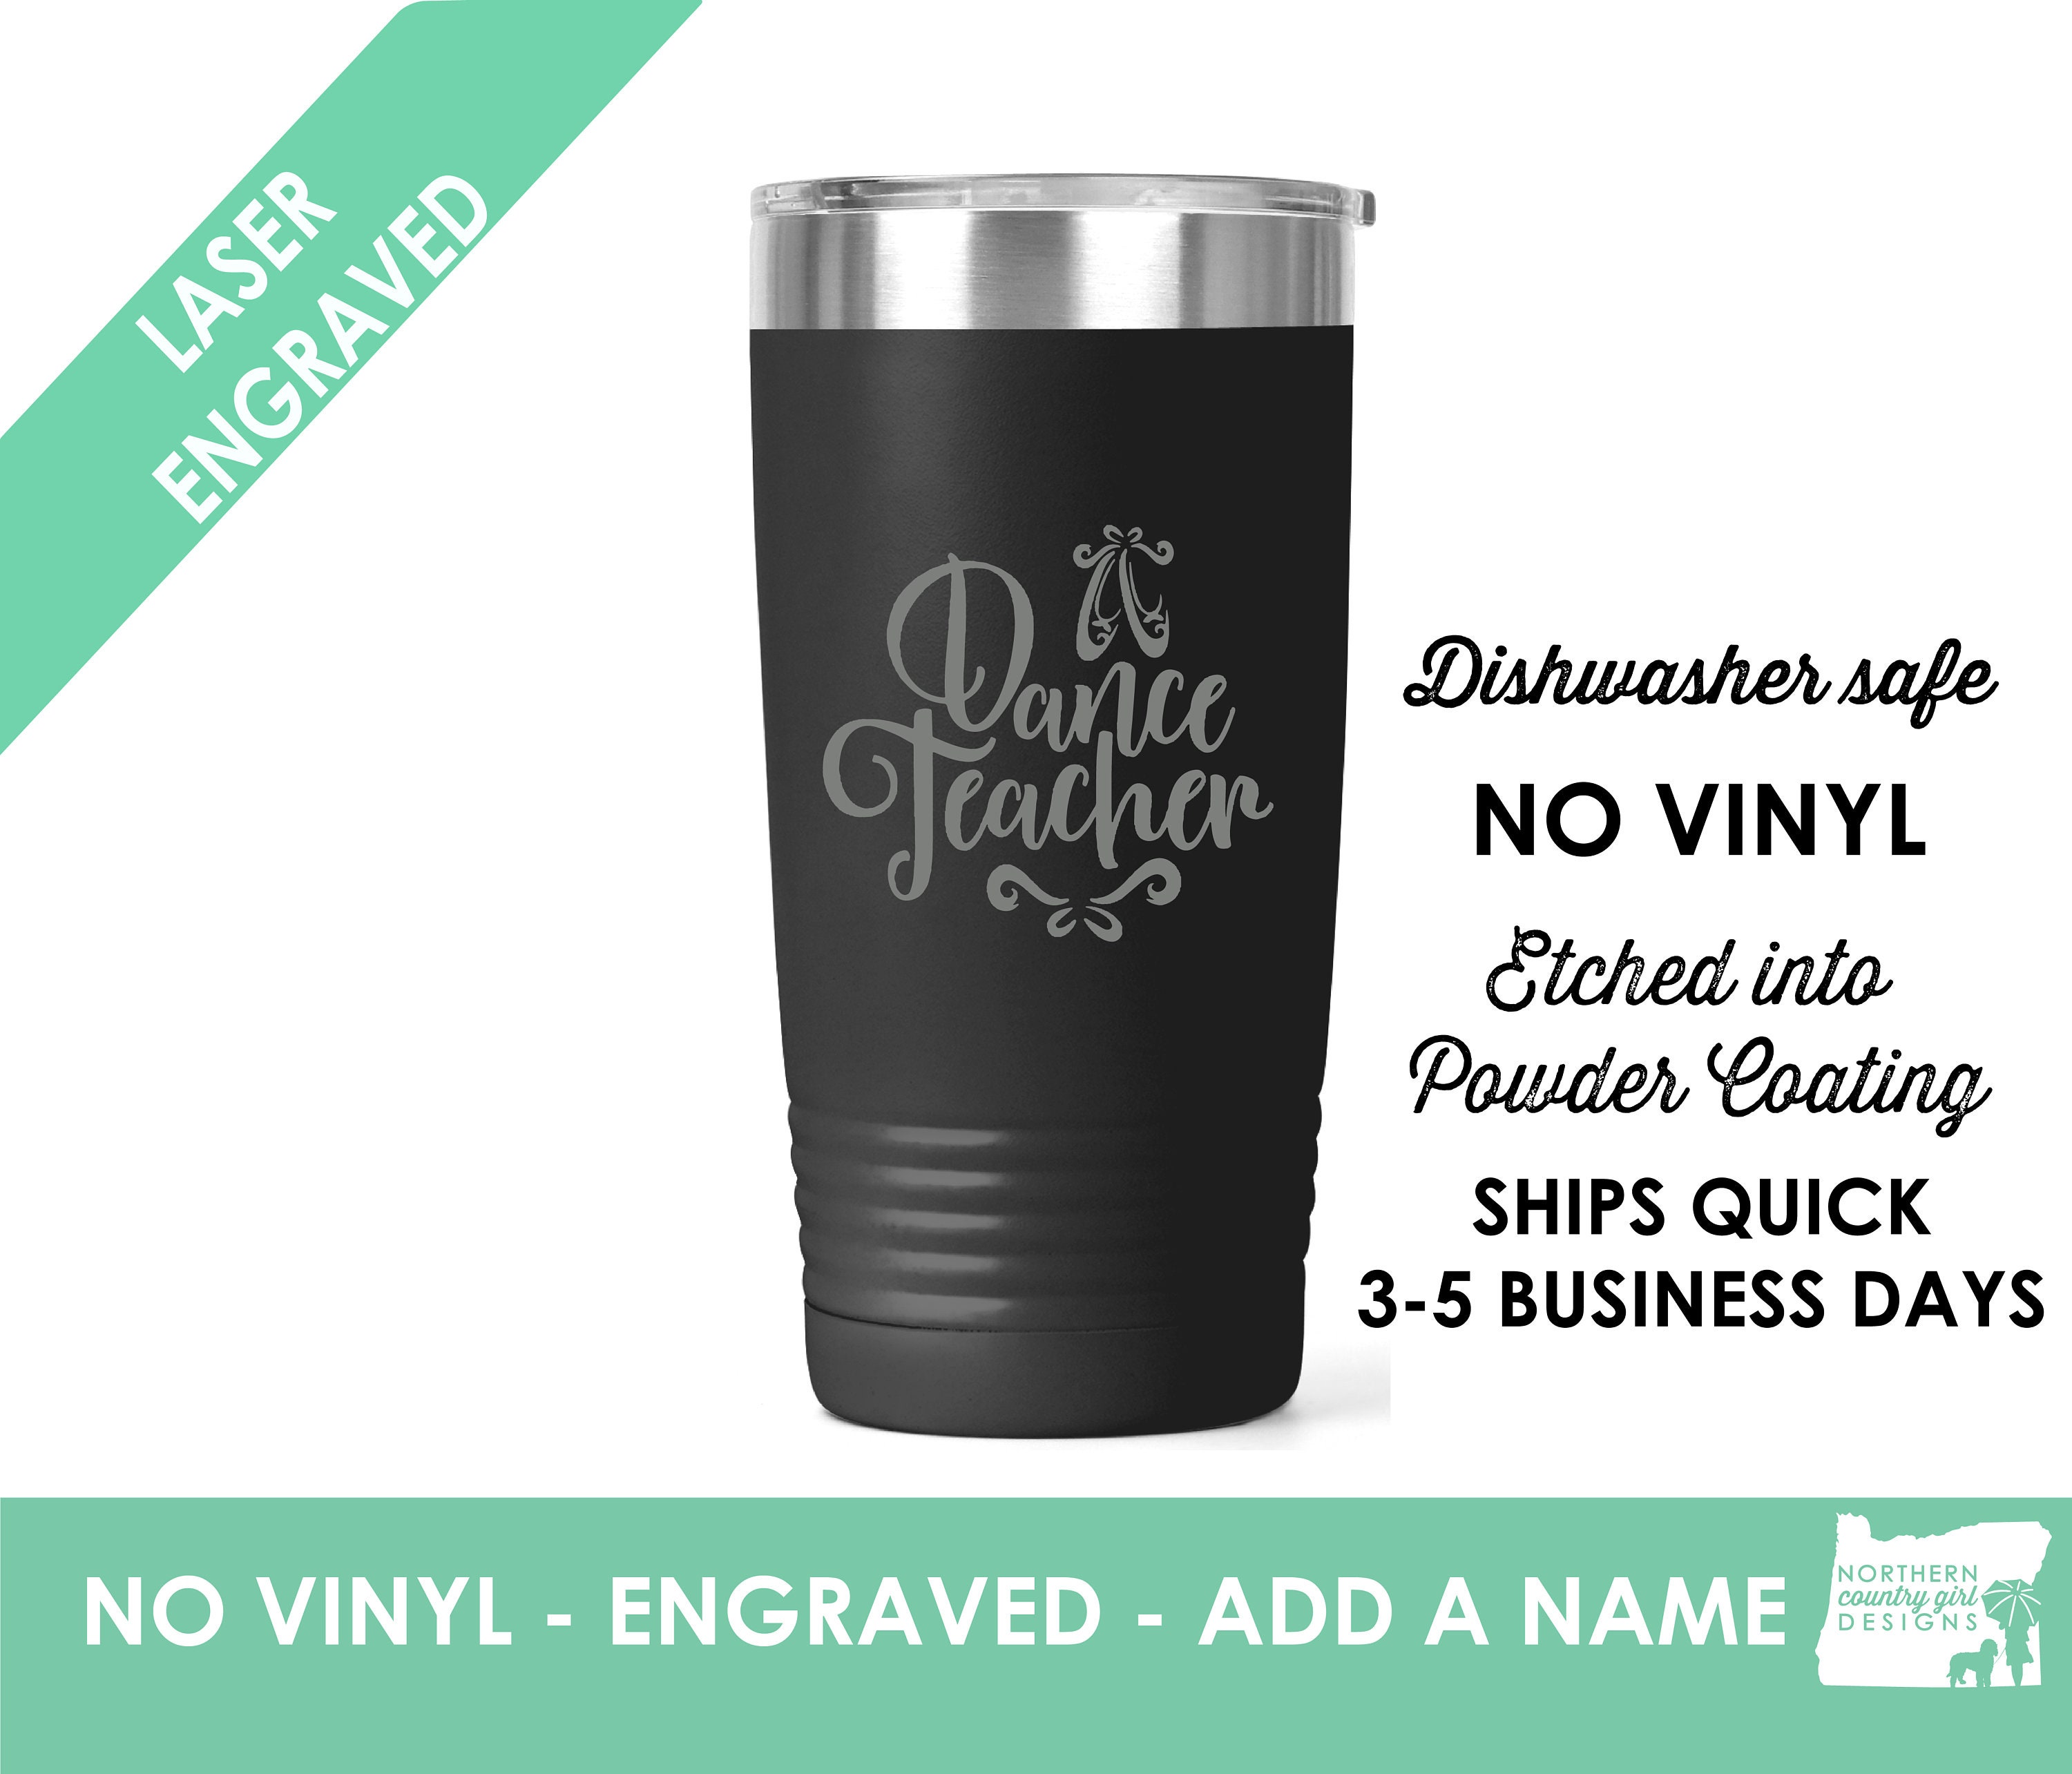 Insulated Coffee Cup, Personalized Laser Engraved Mug, Dishwasher